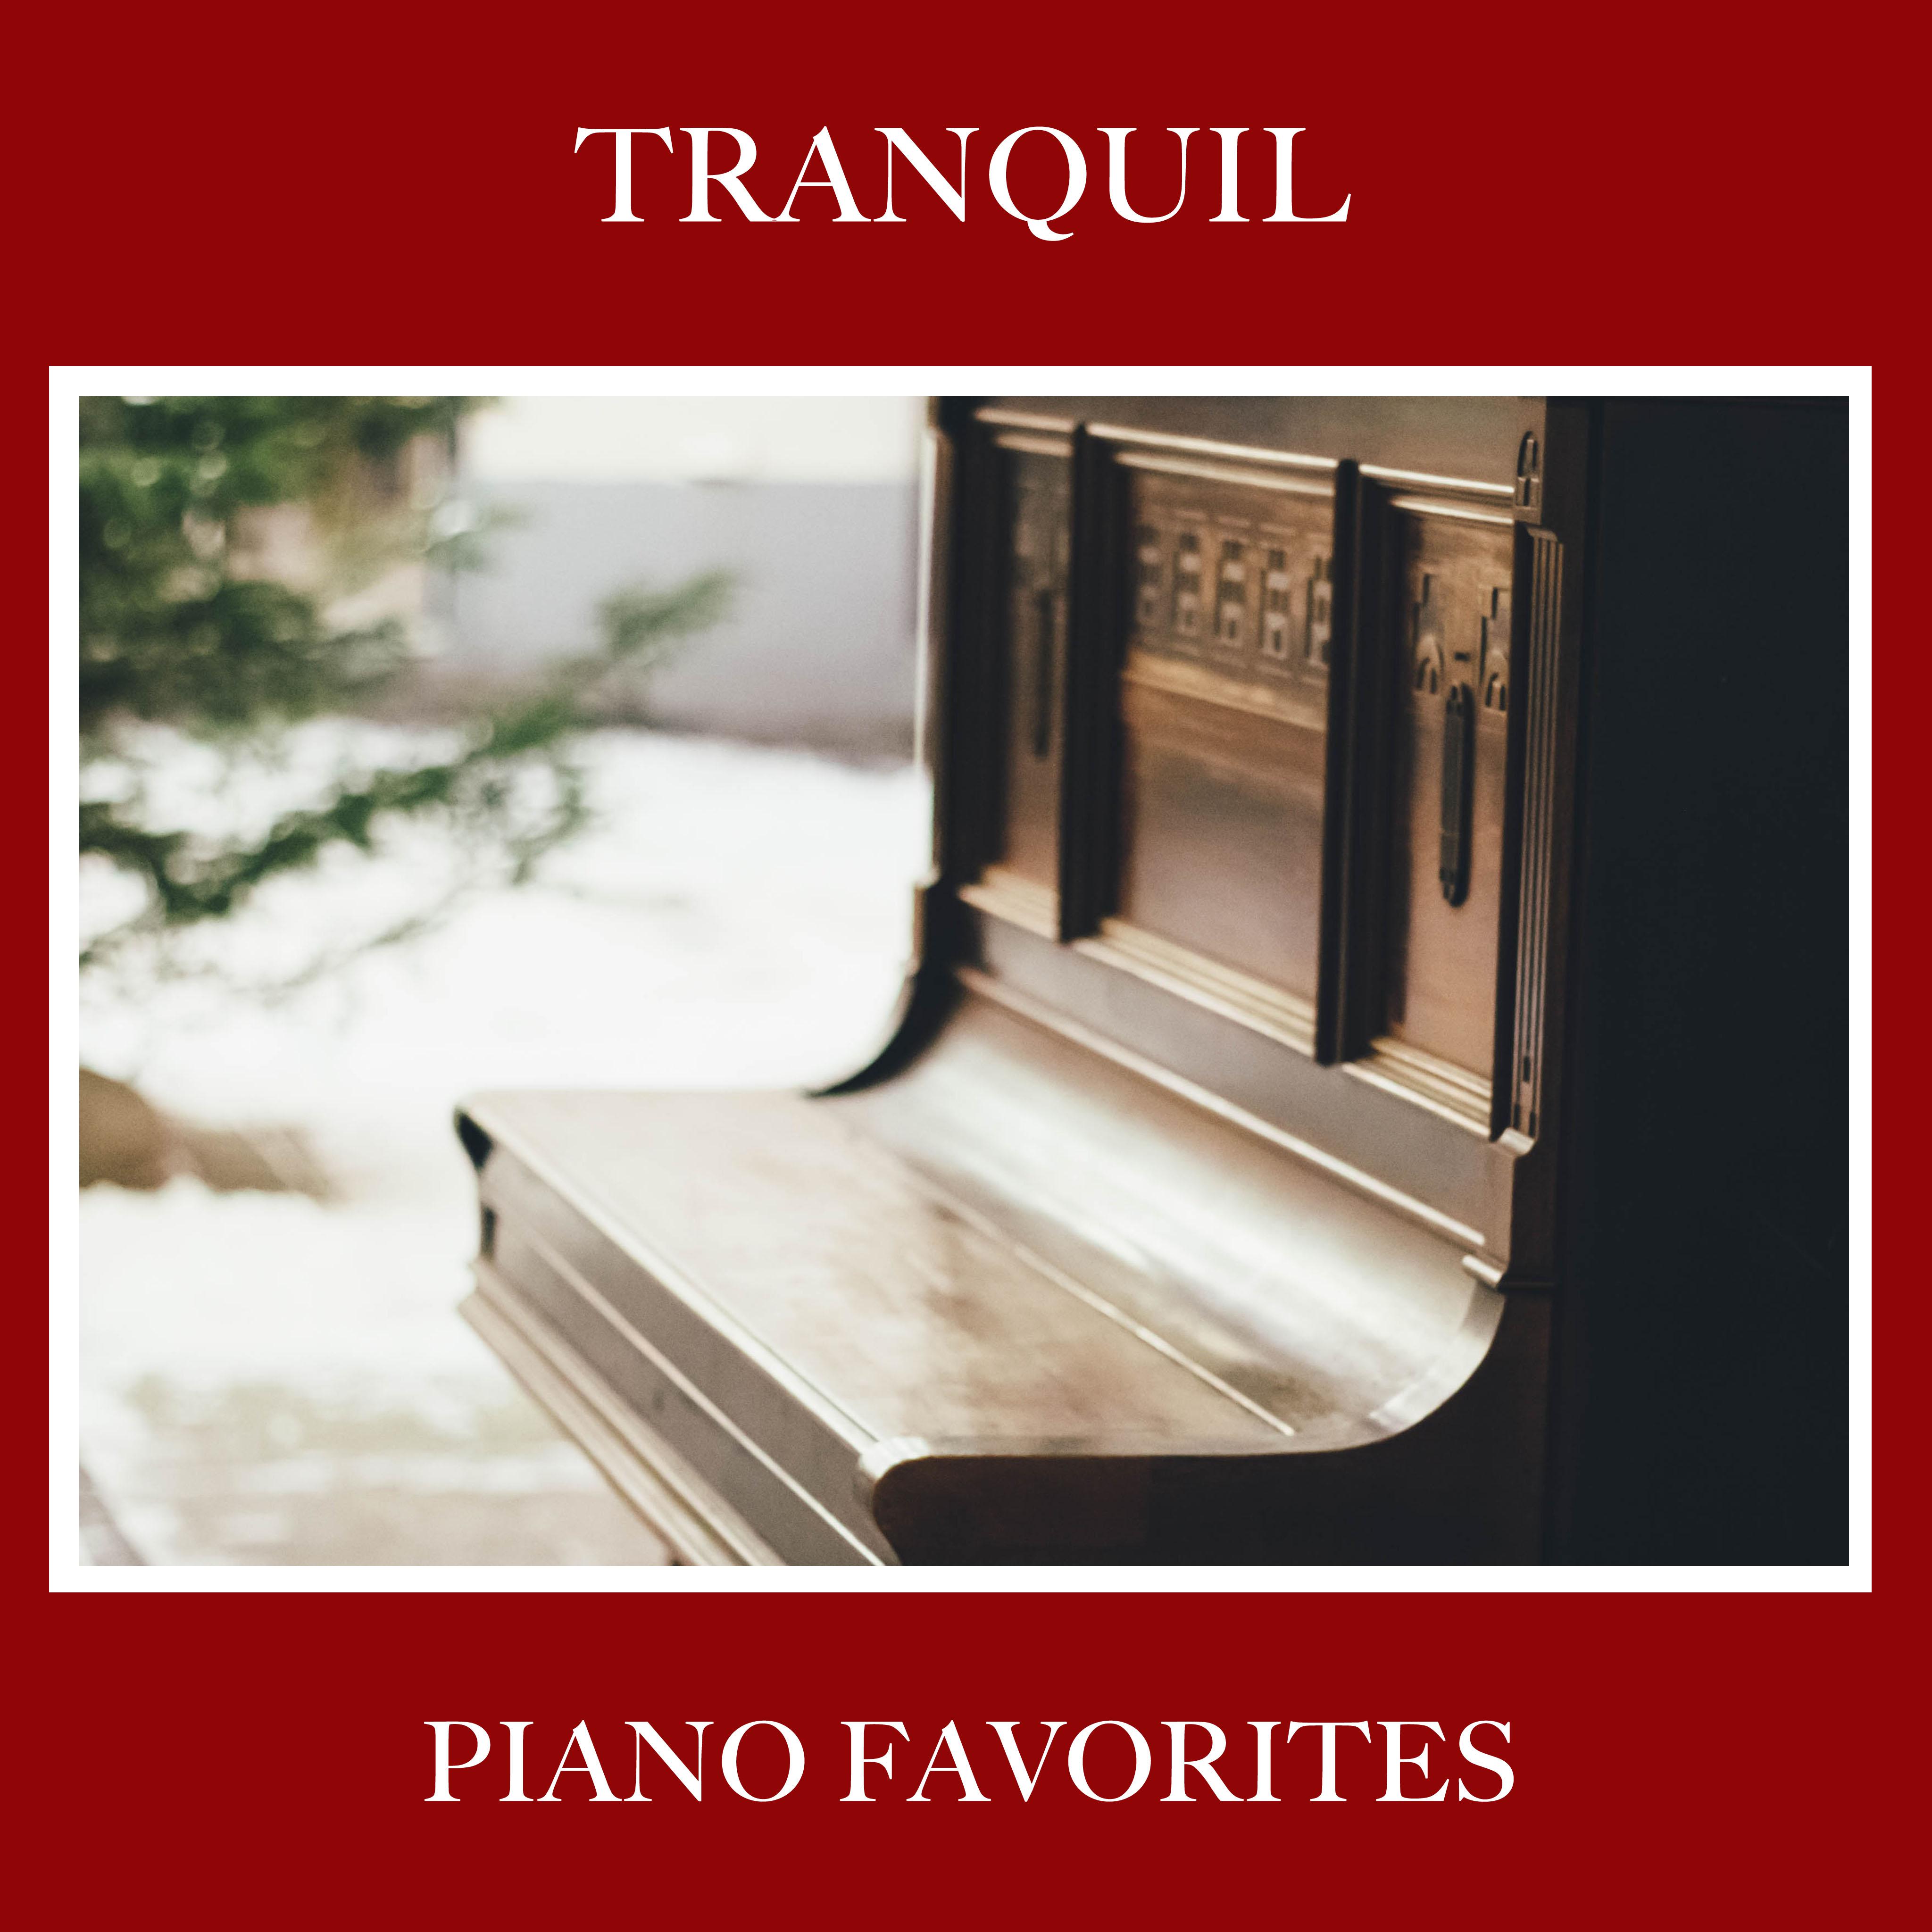 #13 Tranquil Piano Favorites